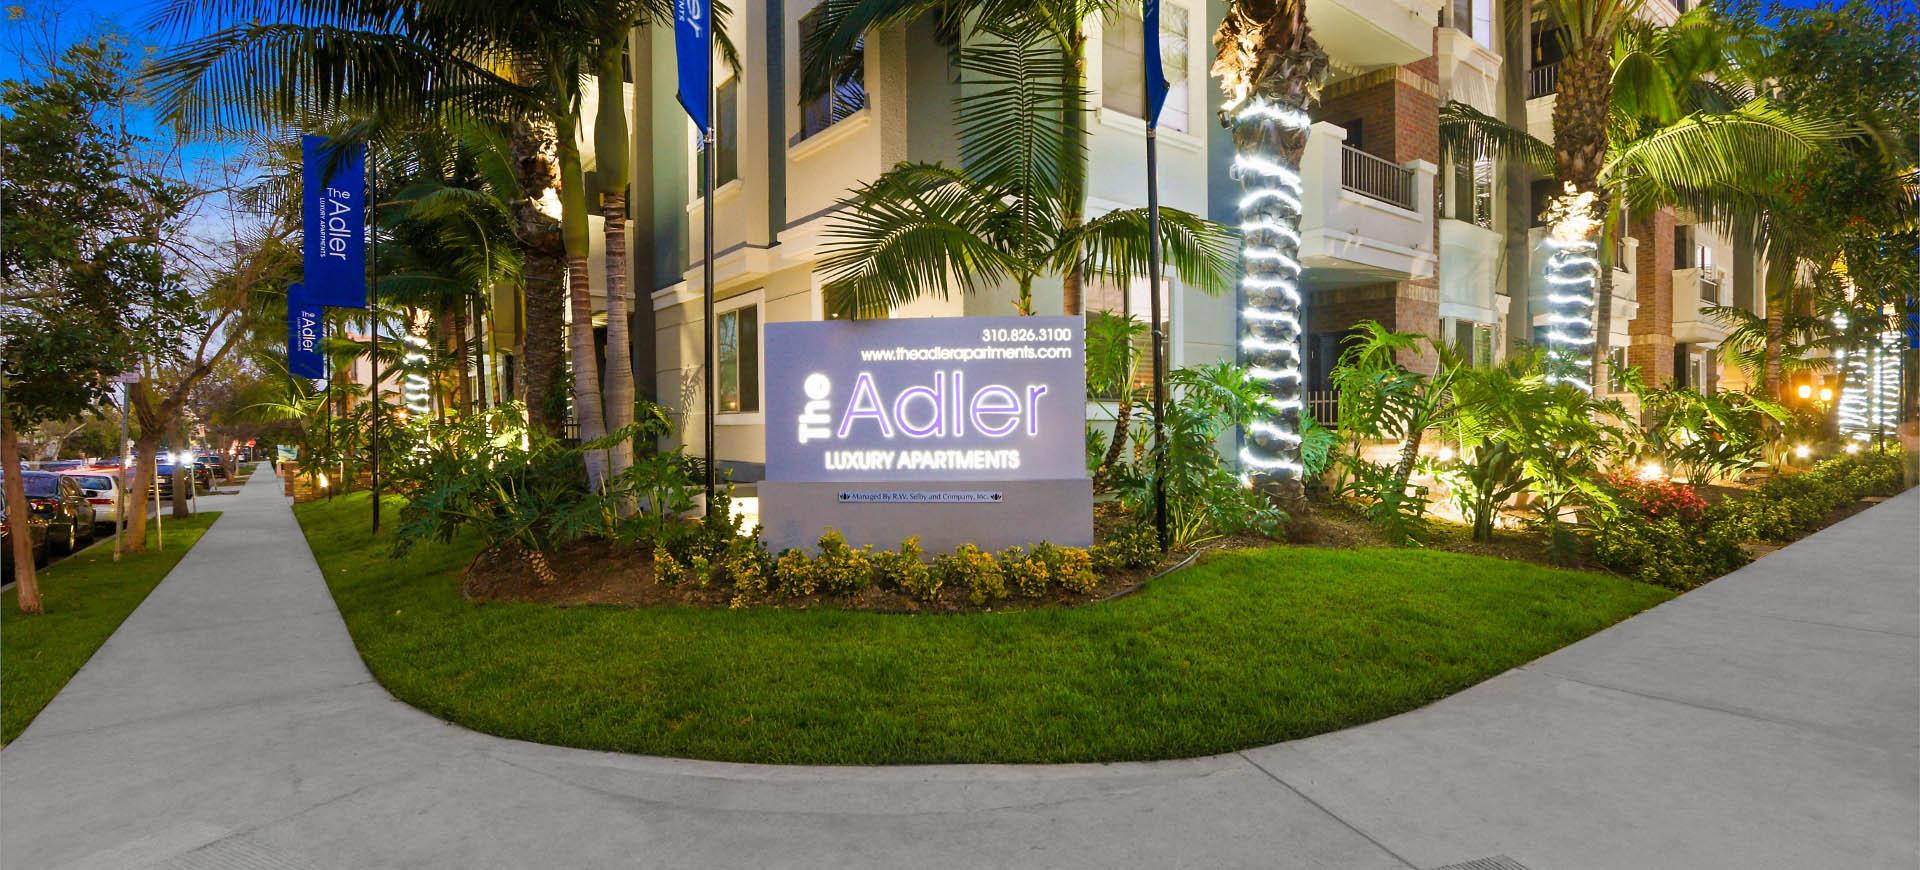 Exterior View In Night at The Adler Apartments, Los Angeles, CA, 90025